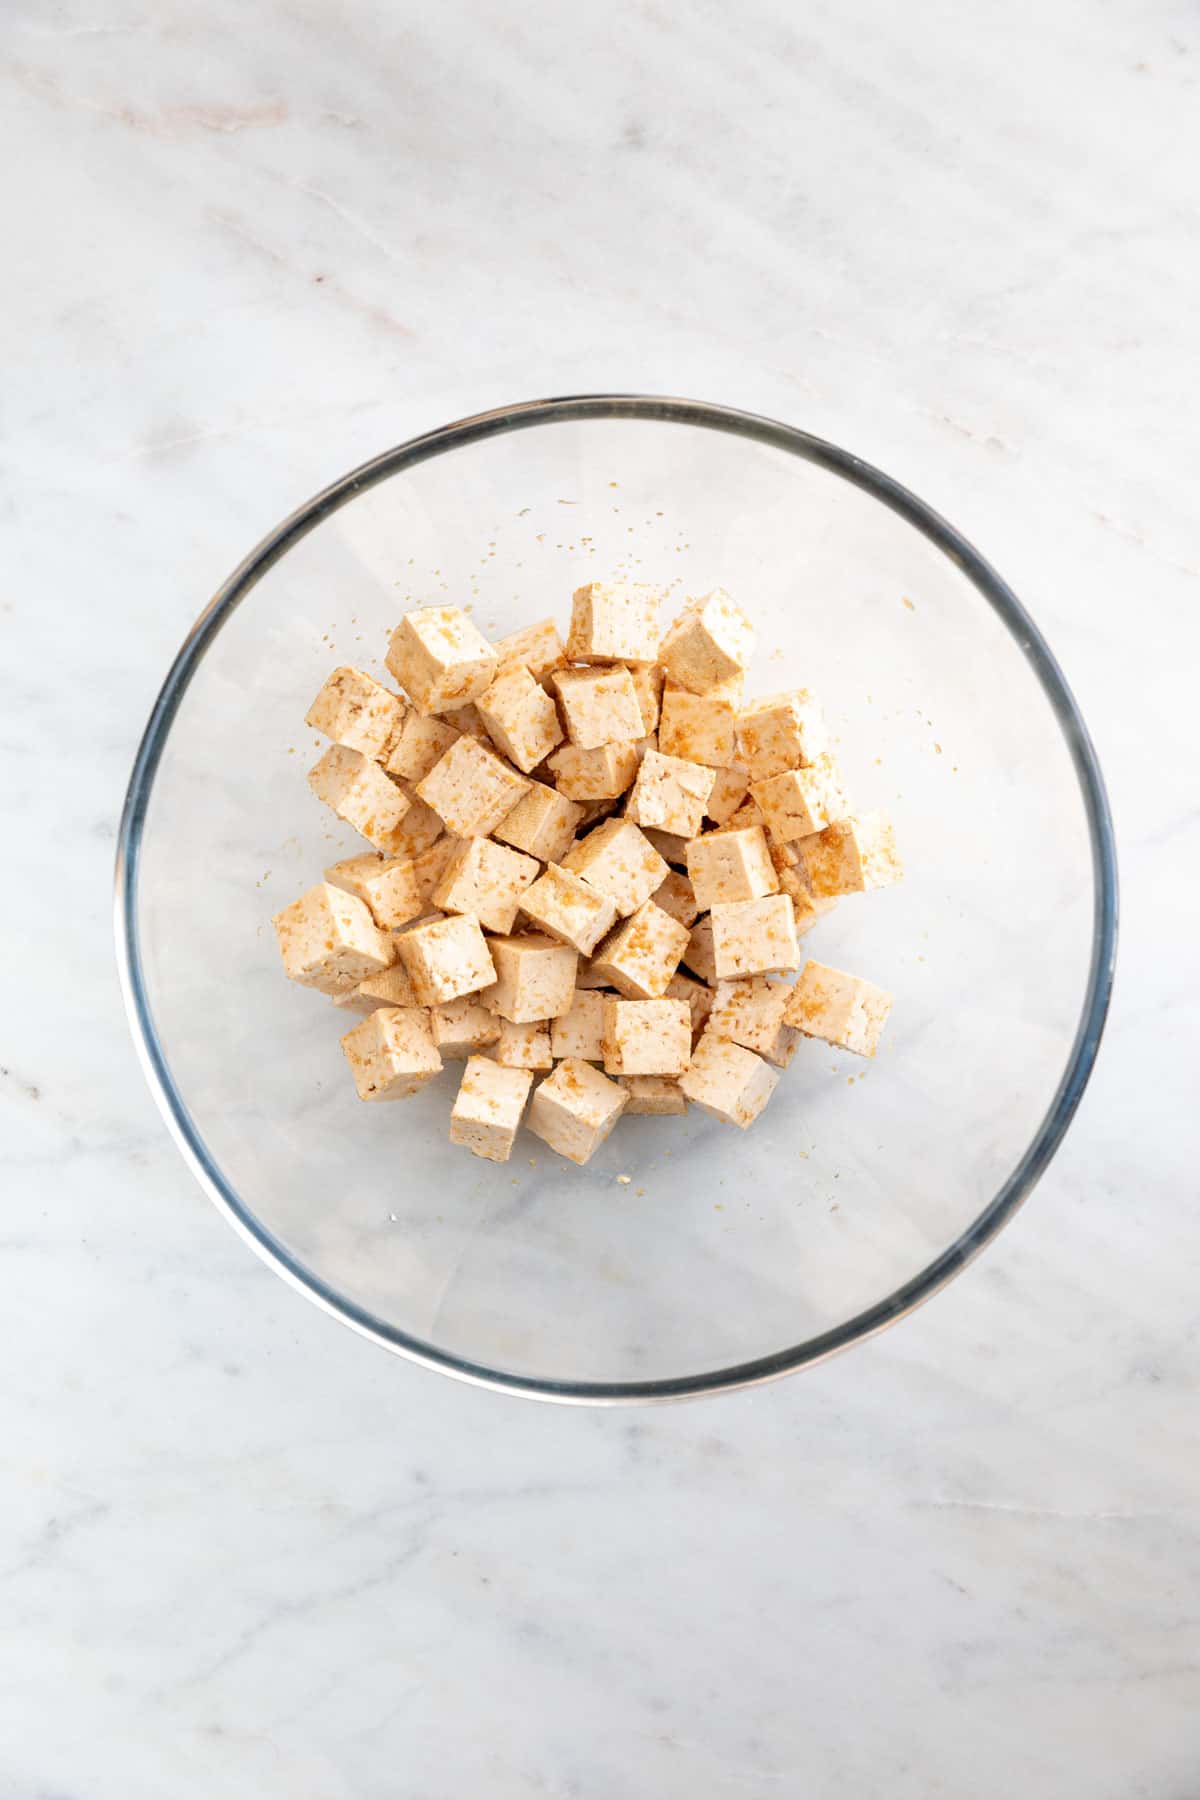 Tofu cubes marinating in a large bowl.